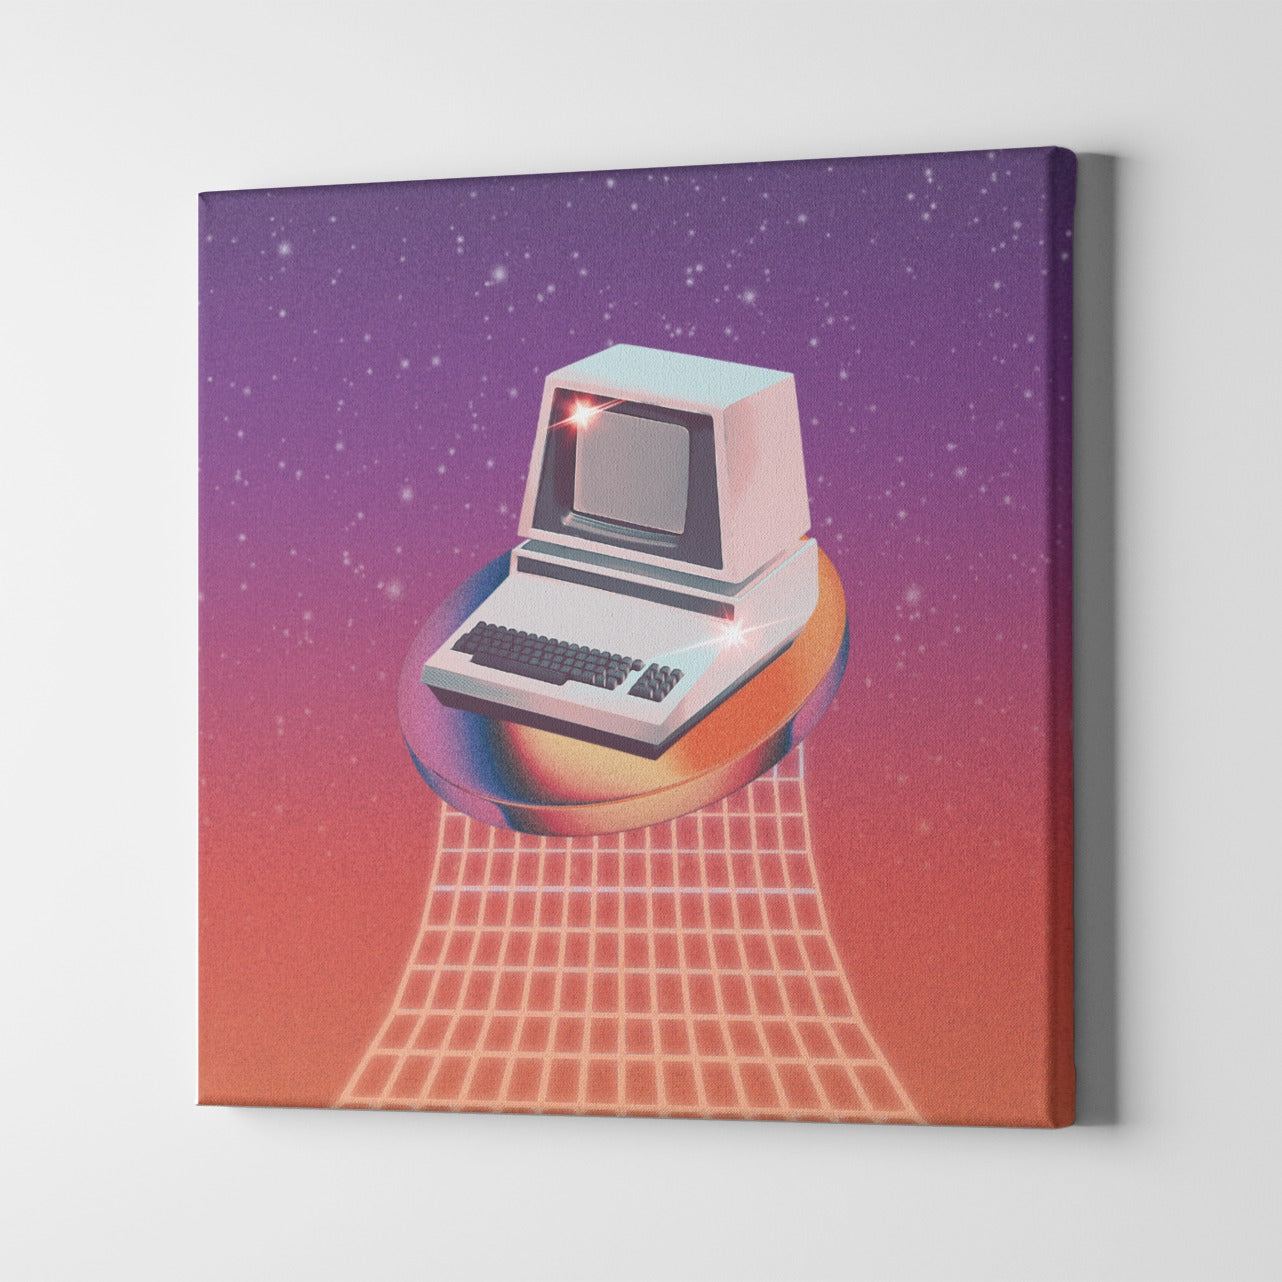 Retro Computer Canvas Poster On Wooden Frame